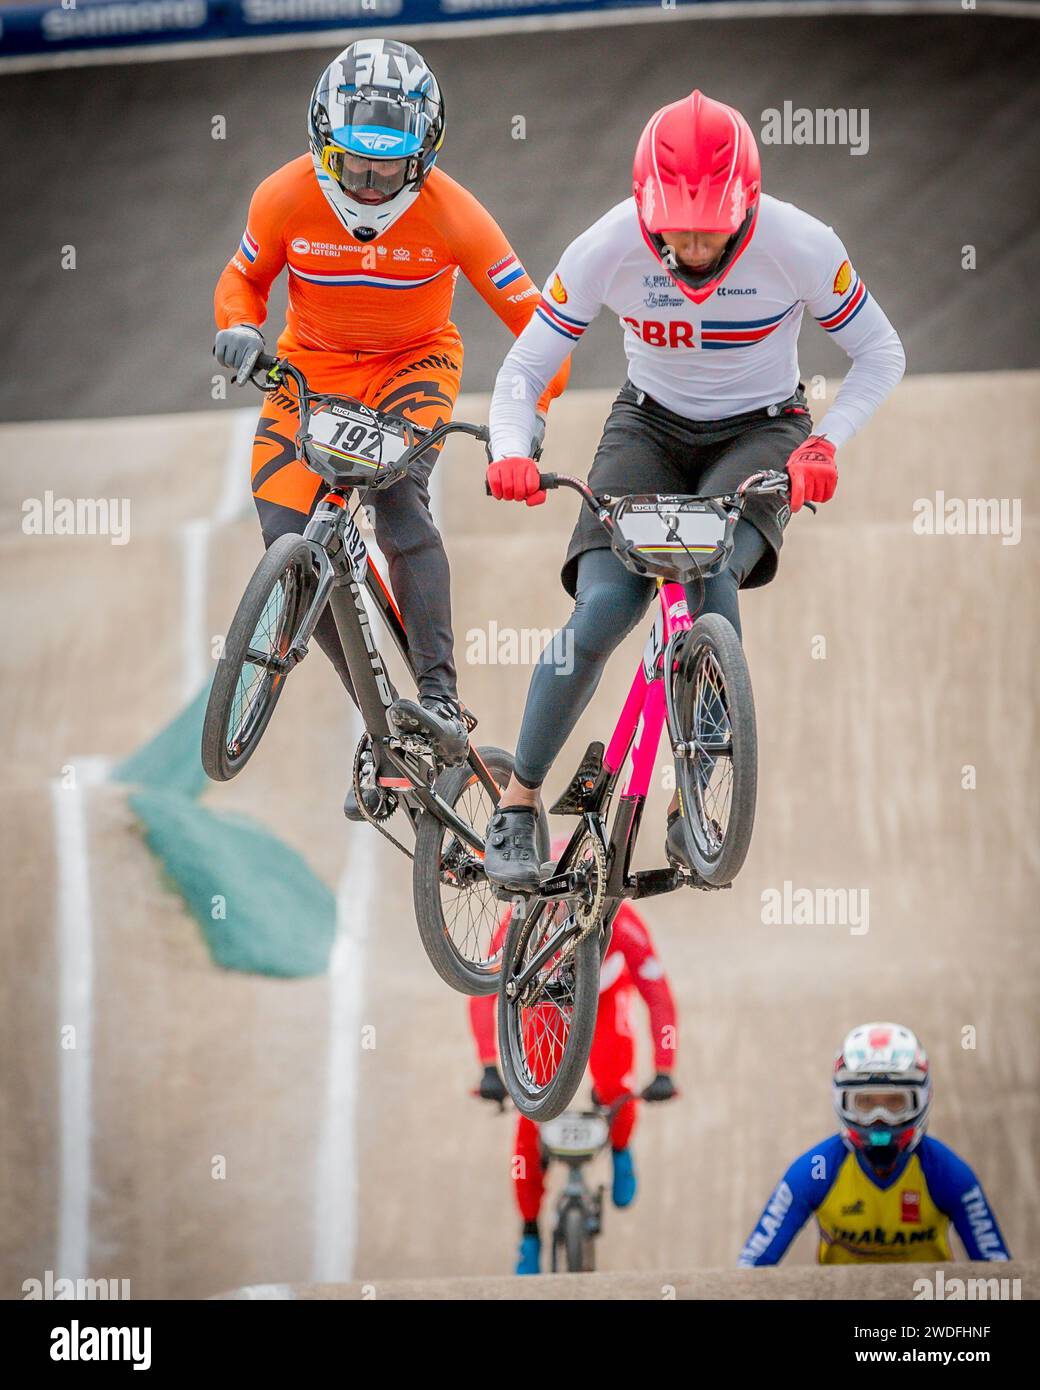 KYE WHYTE (GBR) and Dave Van Der BURG (NED) Elite Men BMX Racers at the 2023 UCI BMX Racing World Championships, Glasgow Stock Photo